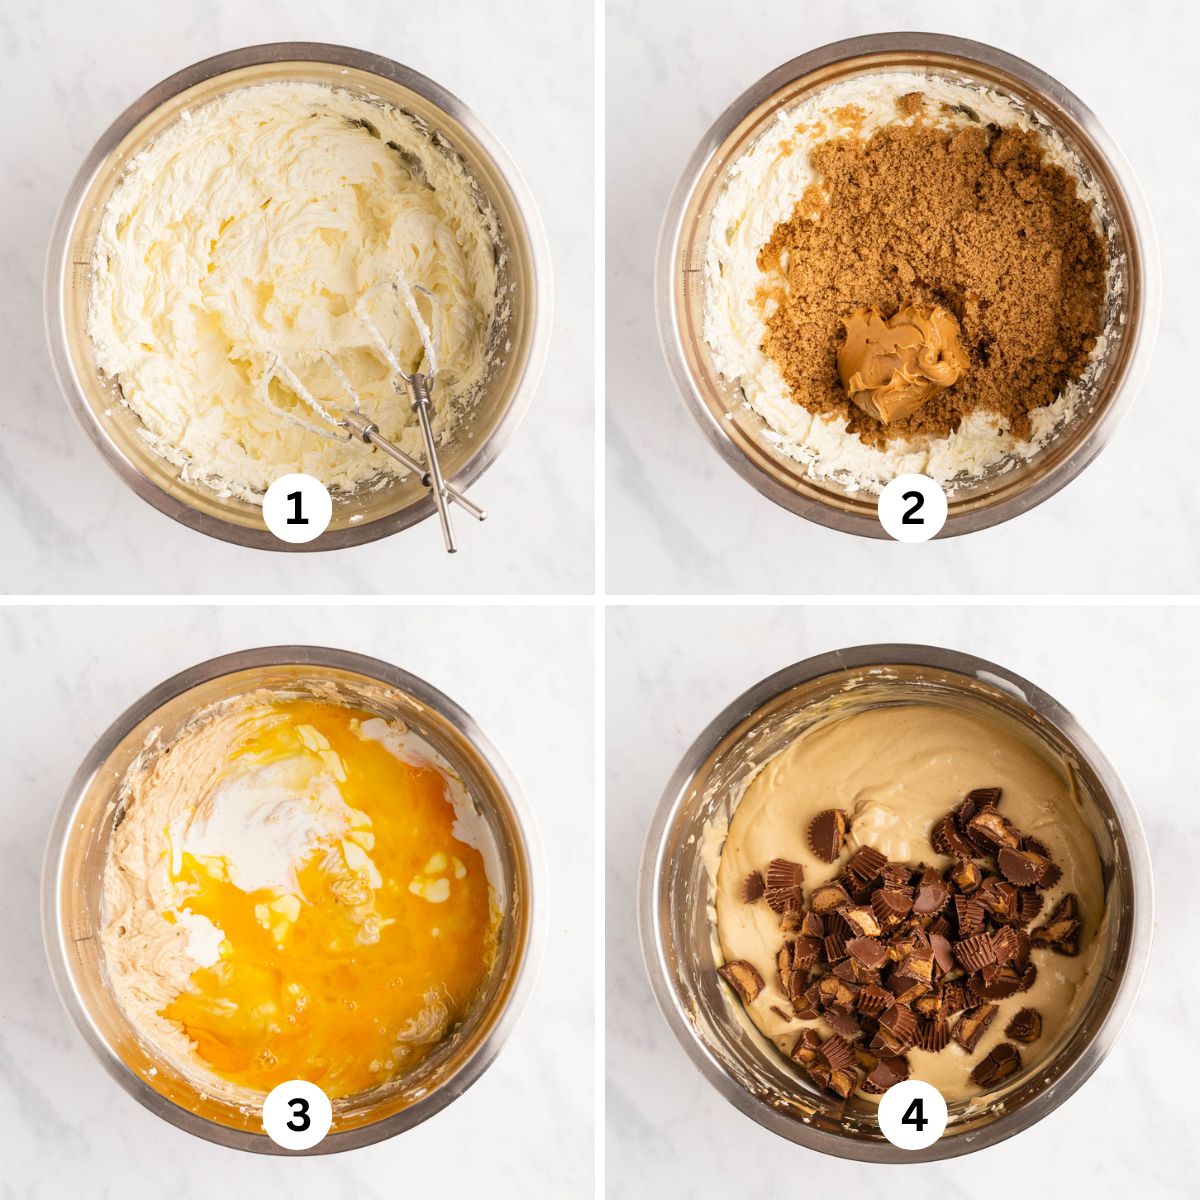 Four overhead images showing the steps of how to make Reese's peanut butter cup cheesecake.